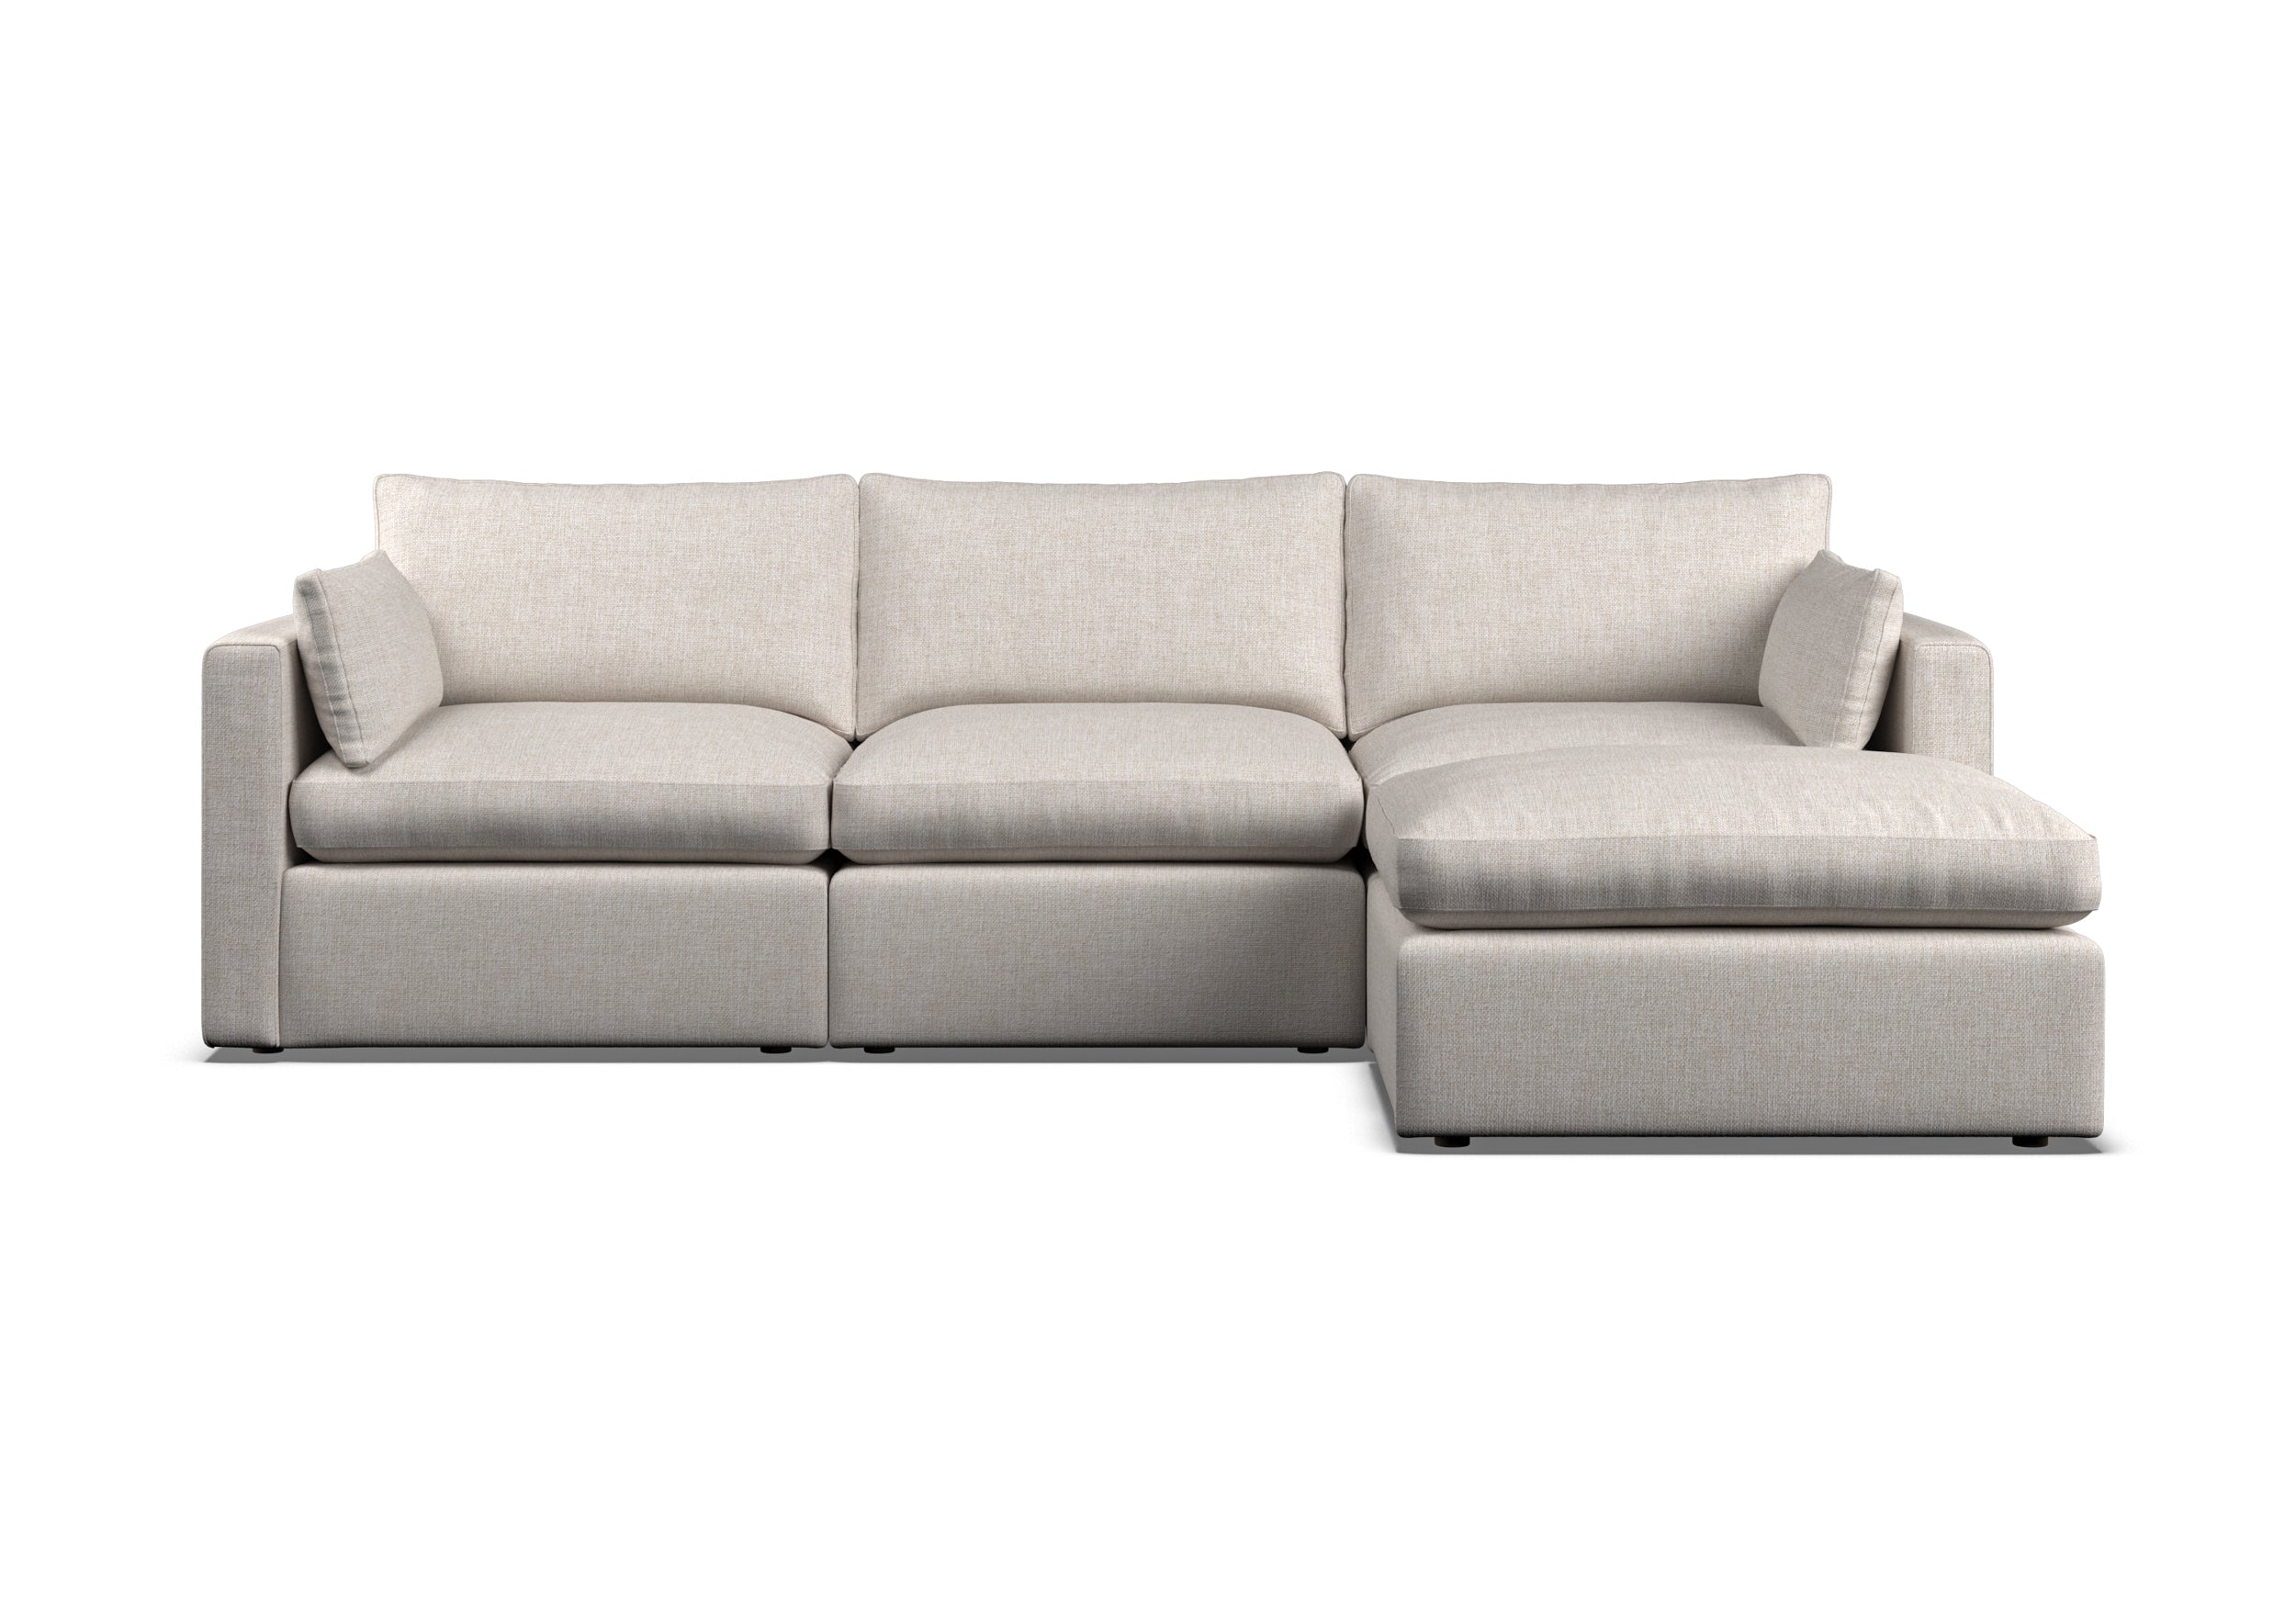 Soulmate Right Arm 4 Piece Modular Chaise Sofa